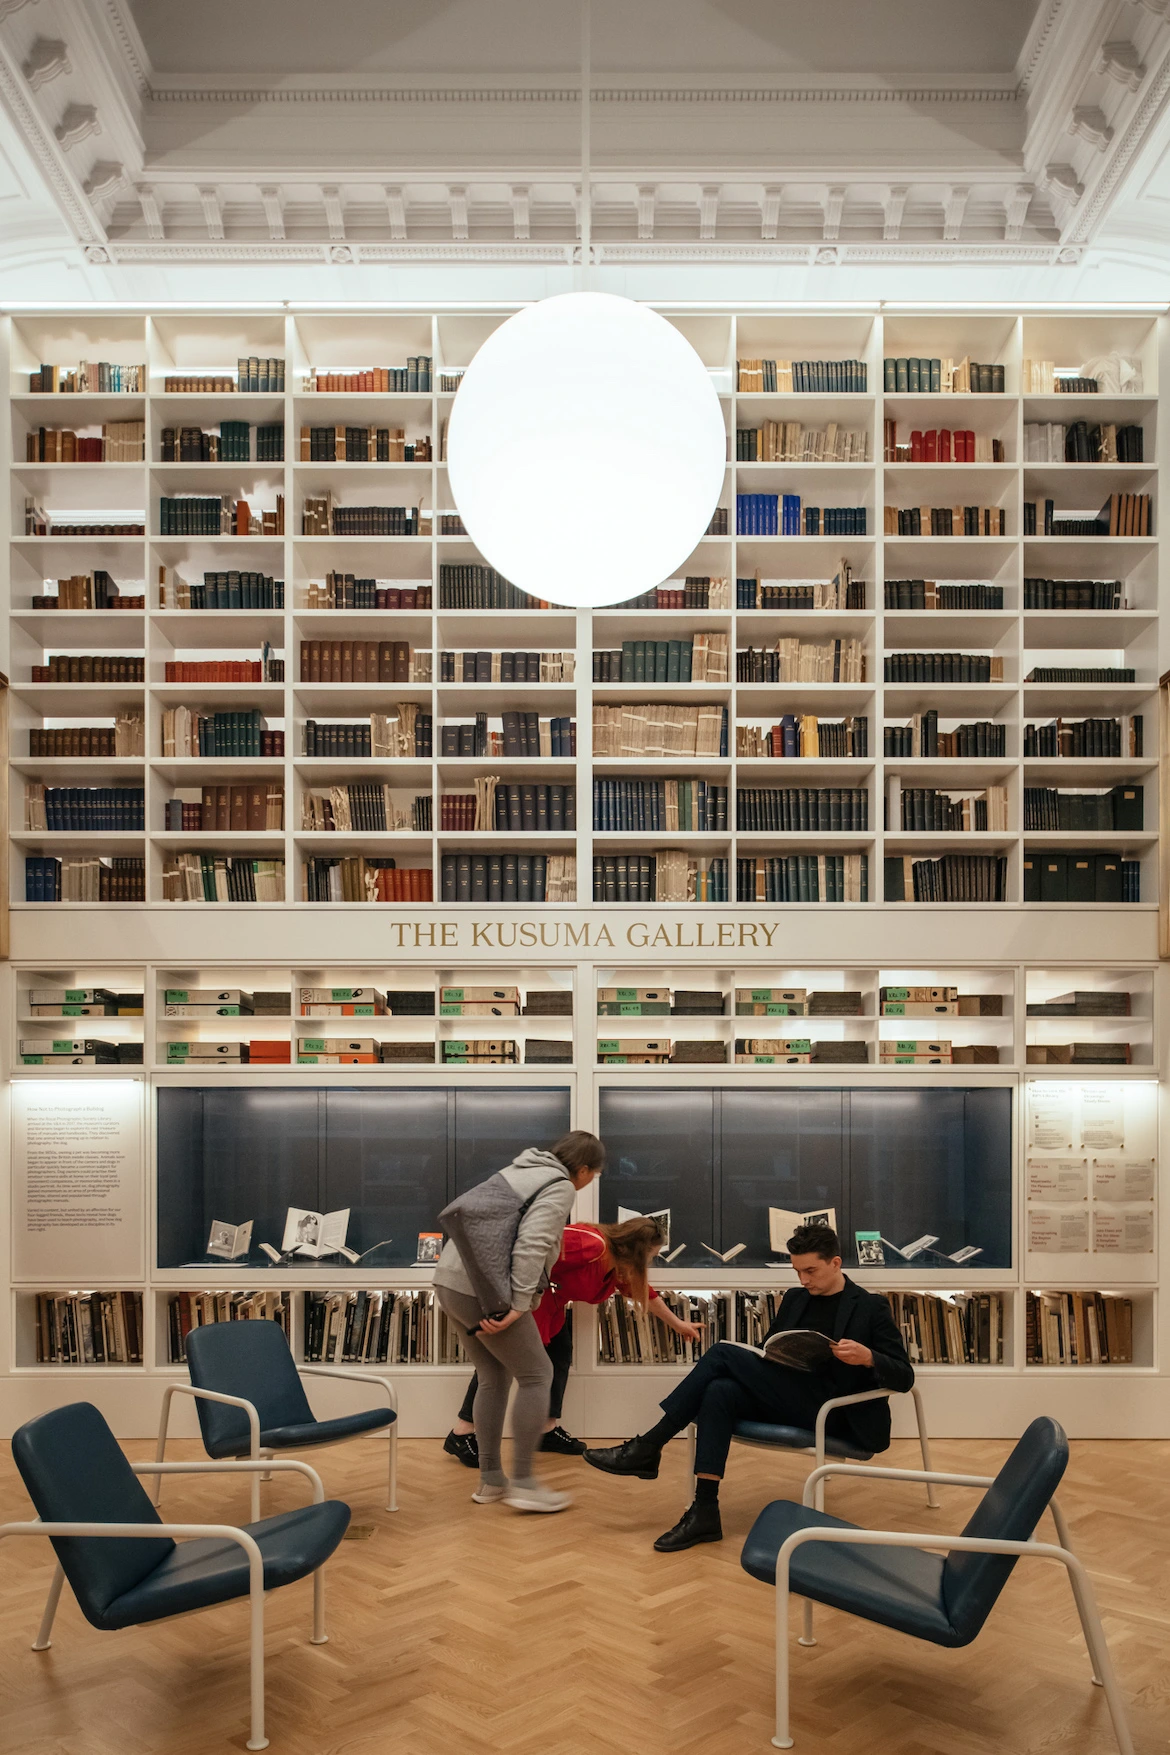 people gather in a museum library space